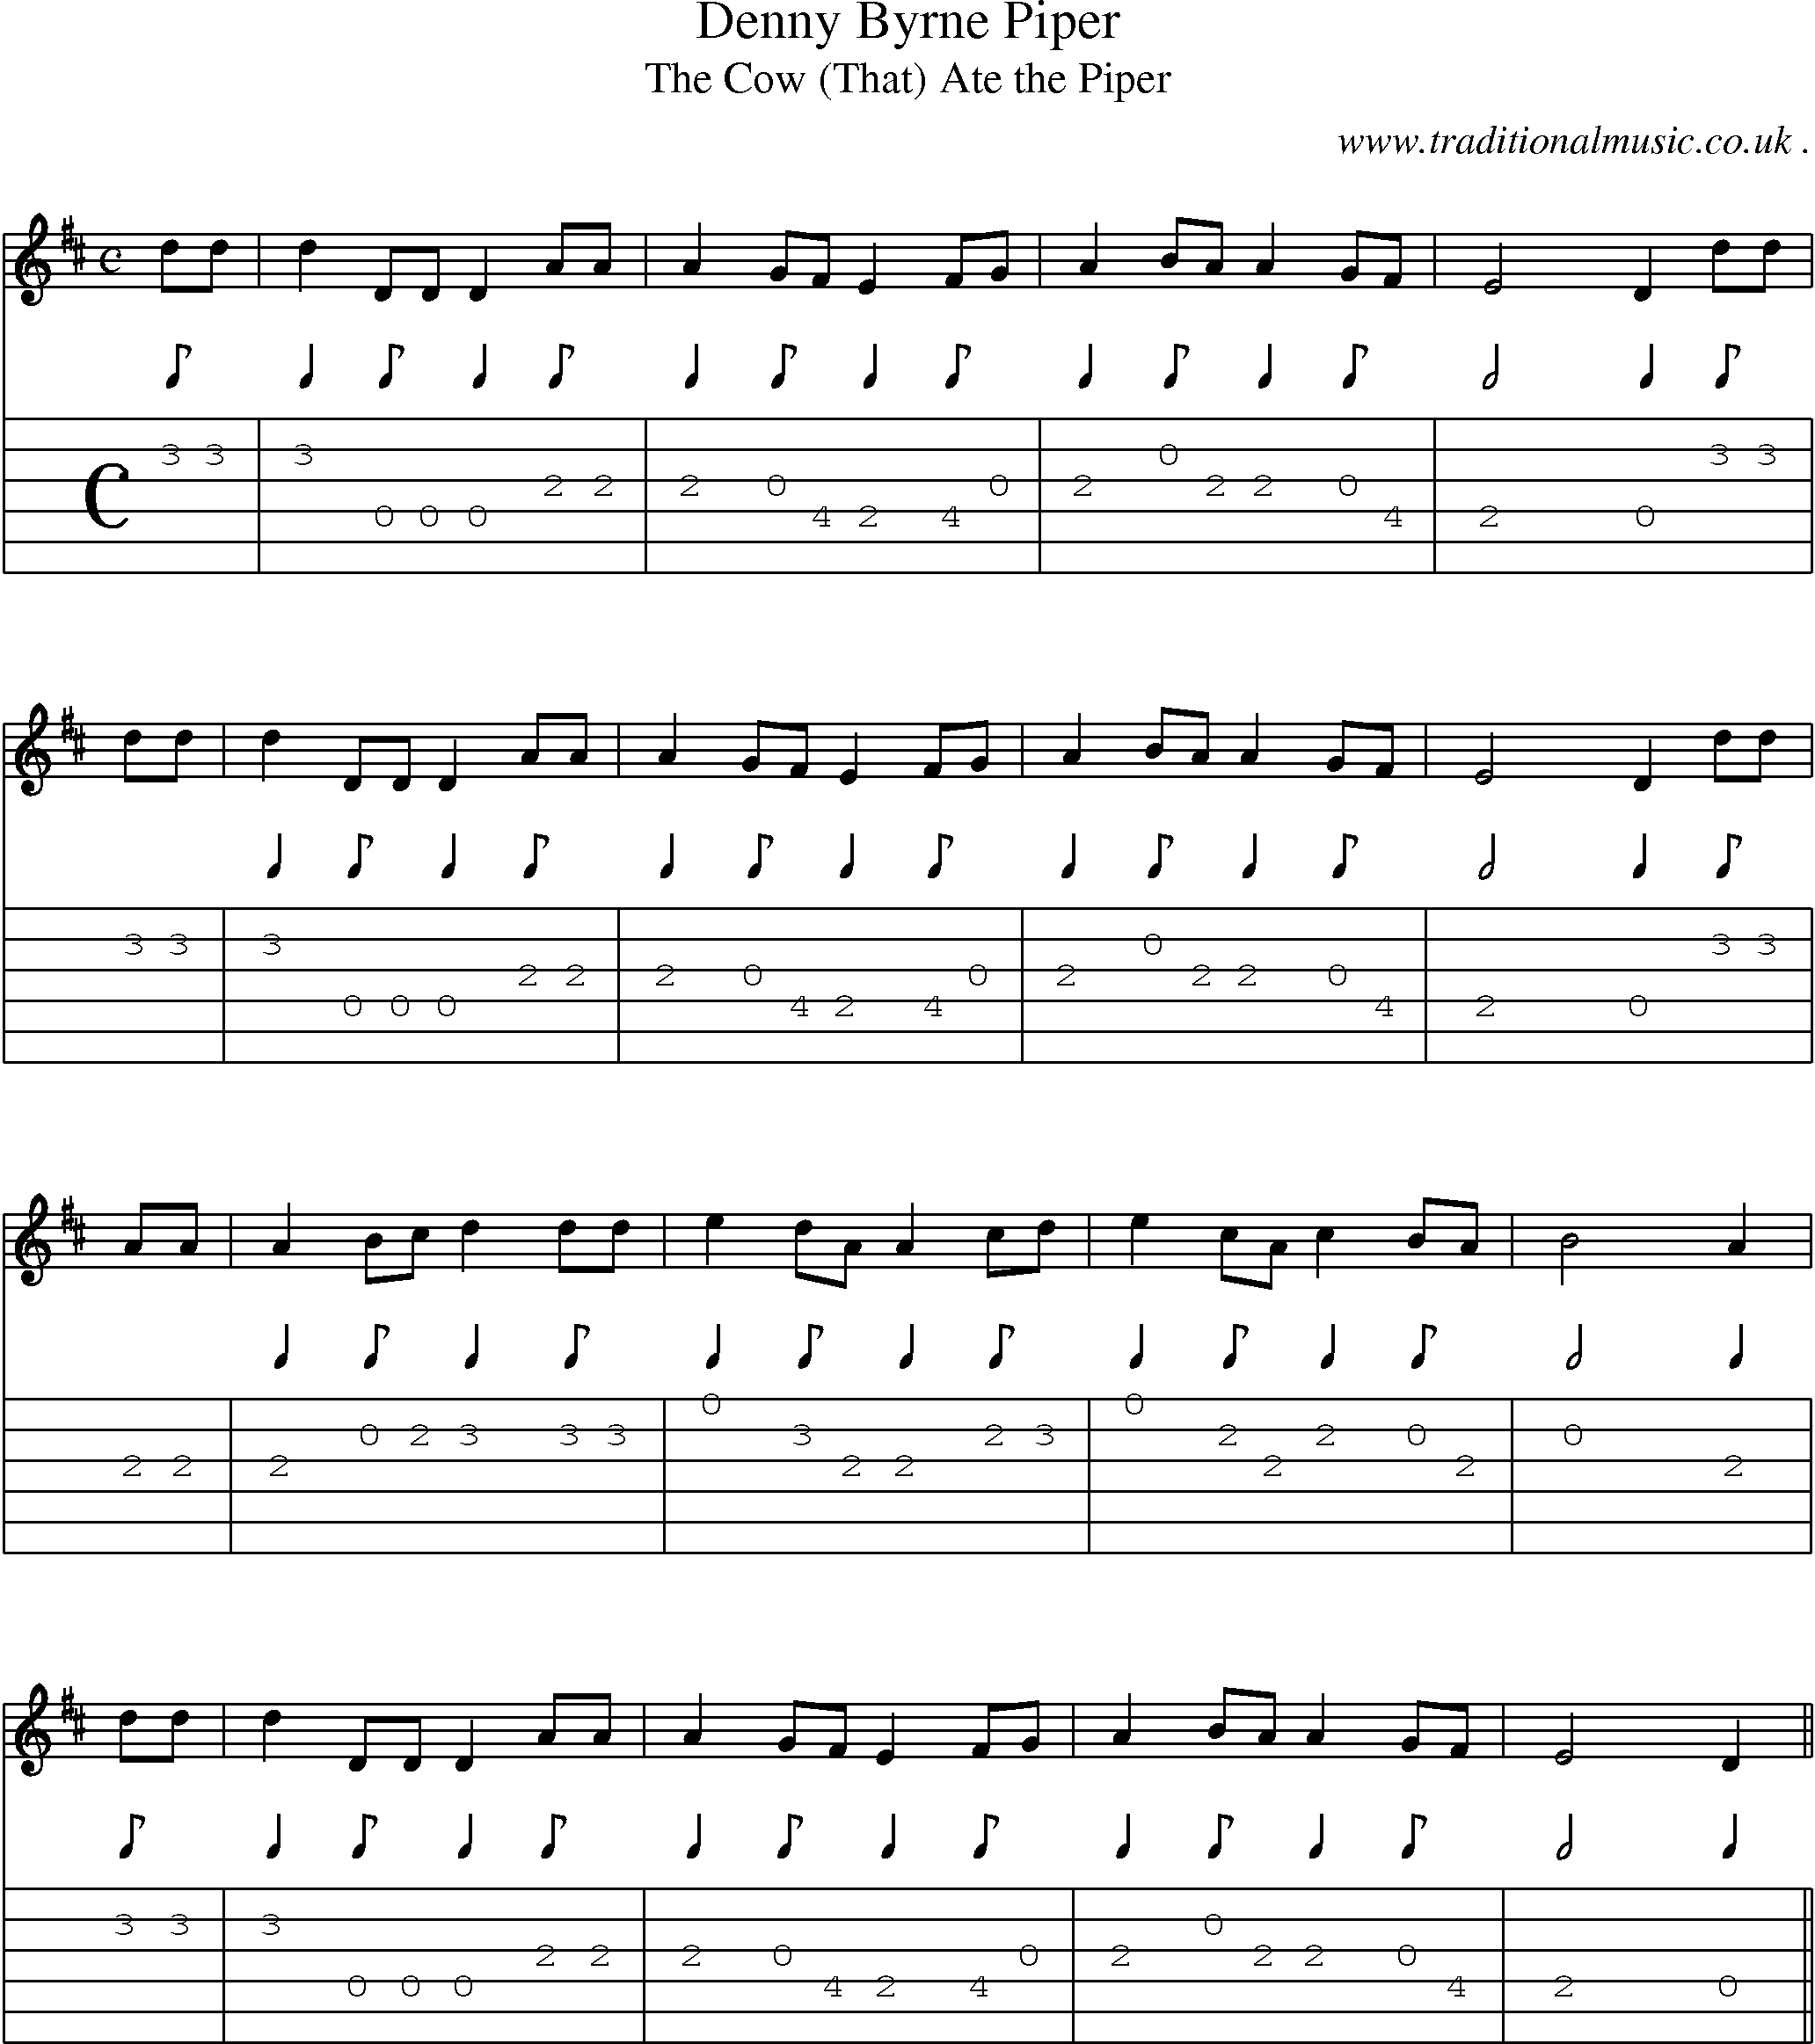 Sheet-Music and Guitar Tabs for Denny Byrne Piper